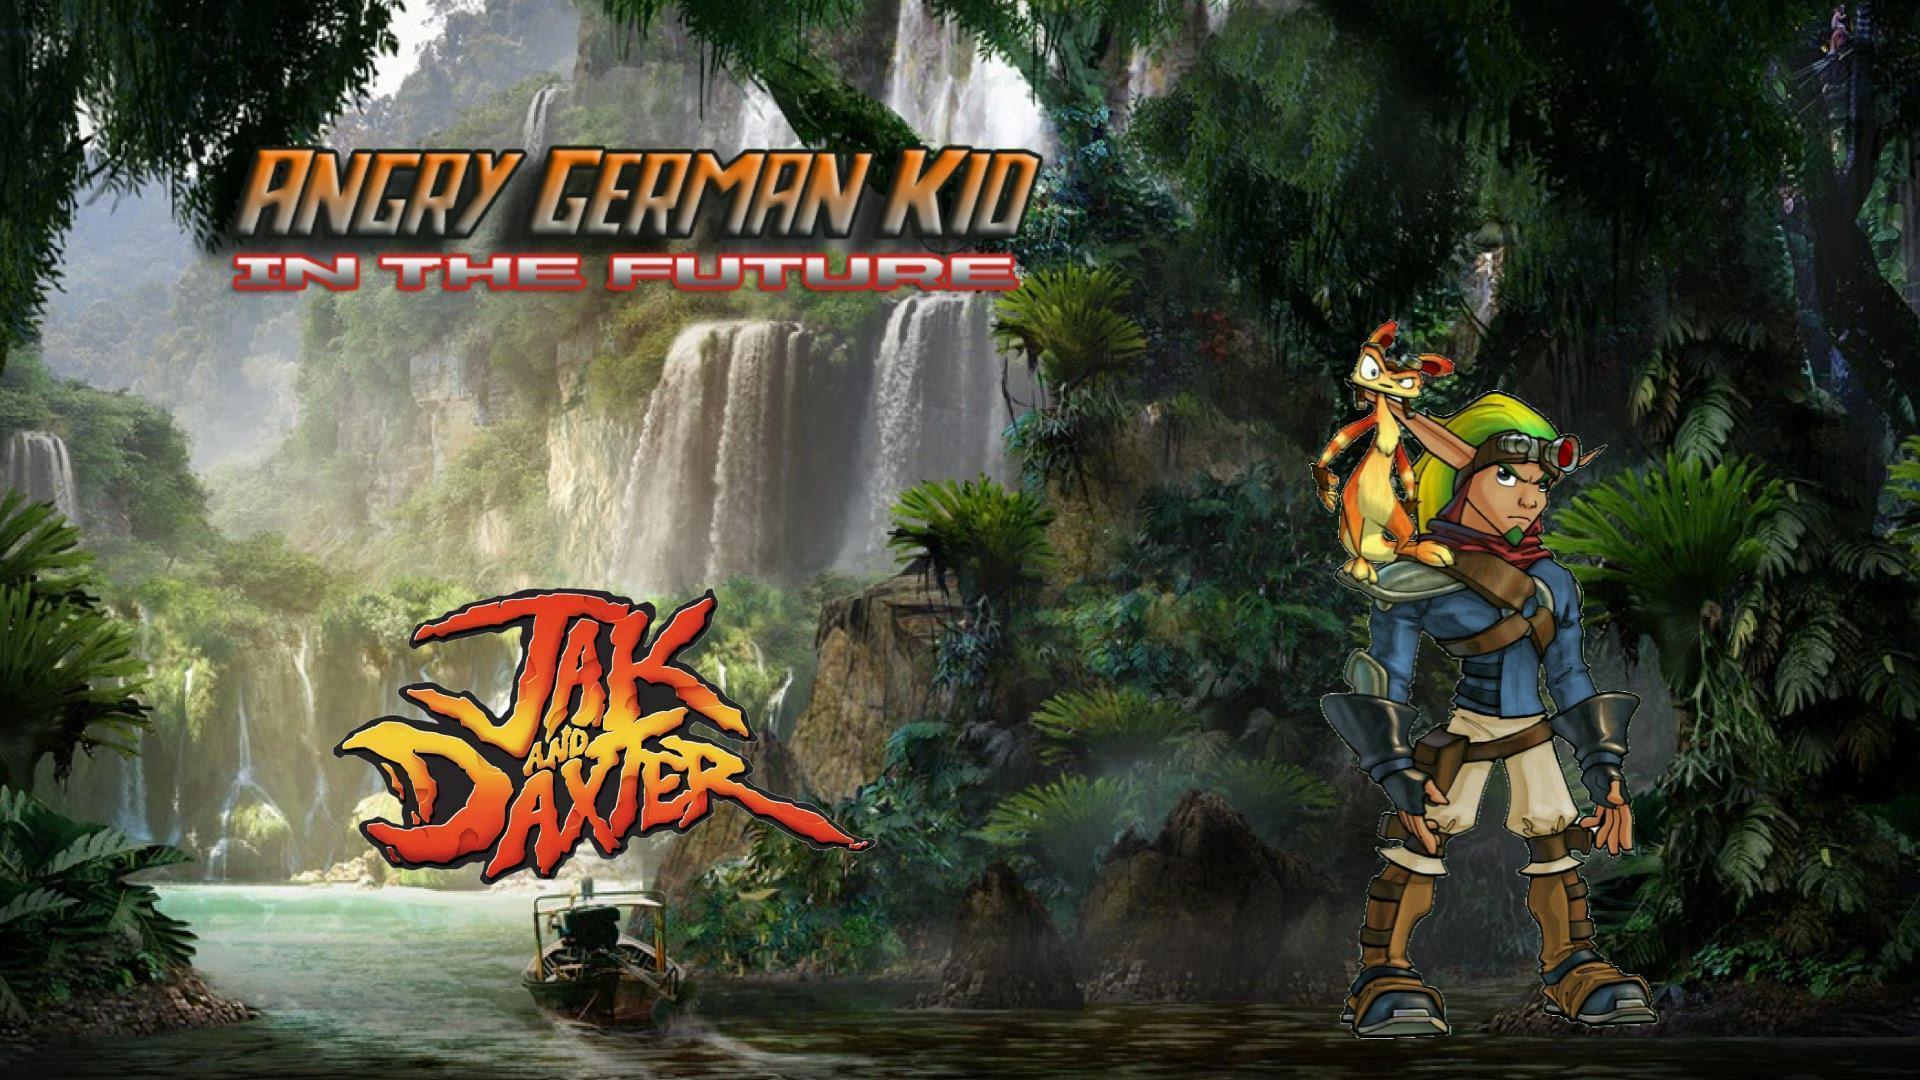 Jak and Daxter. Angry German Kid